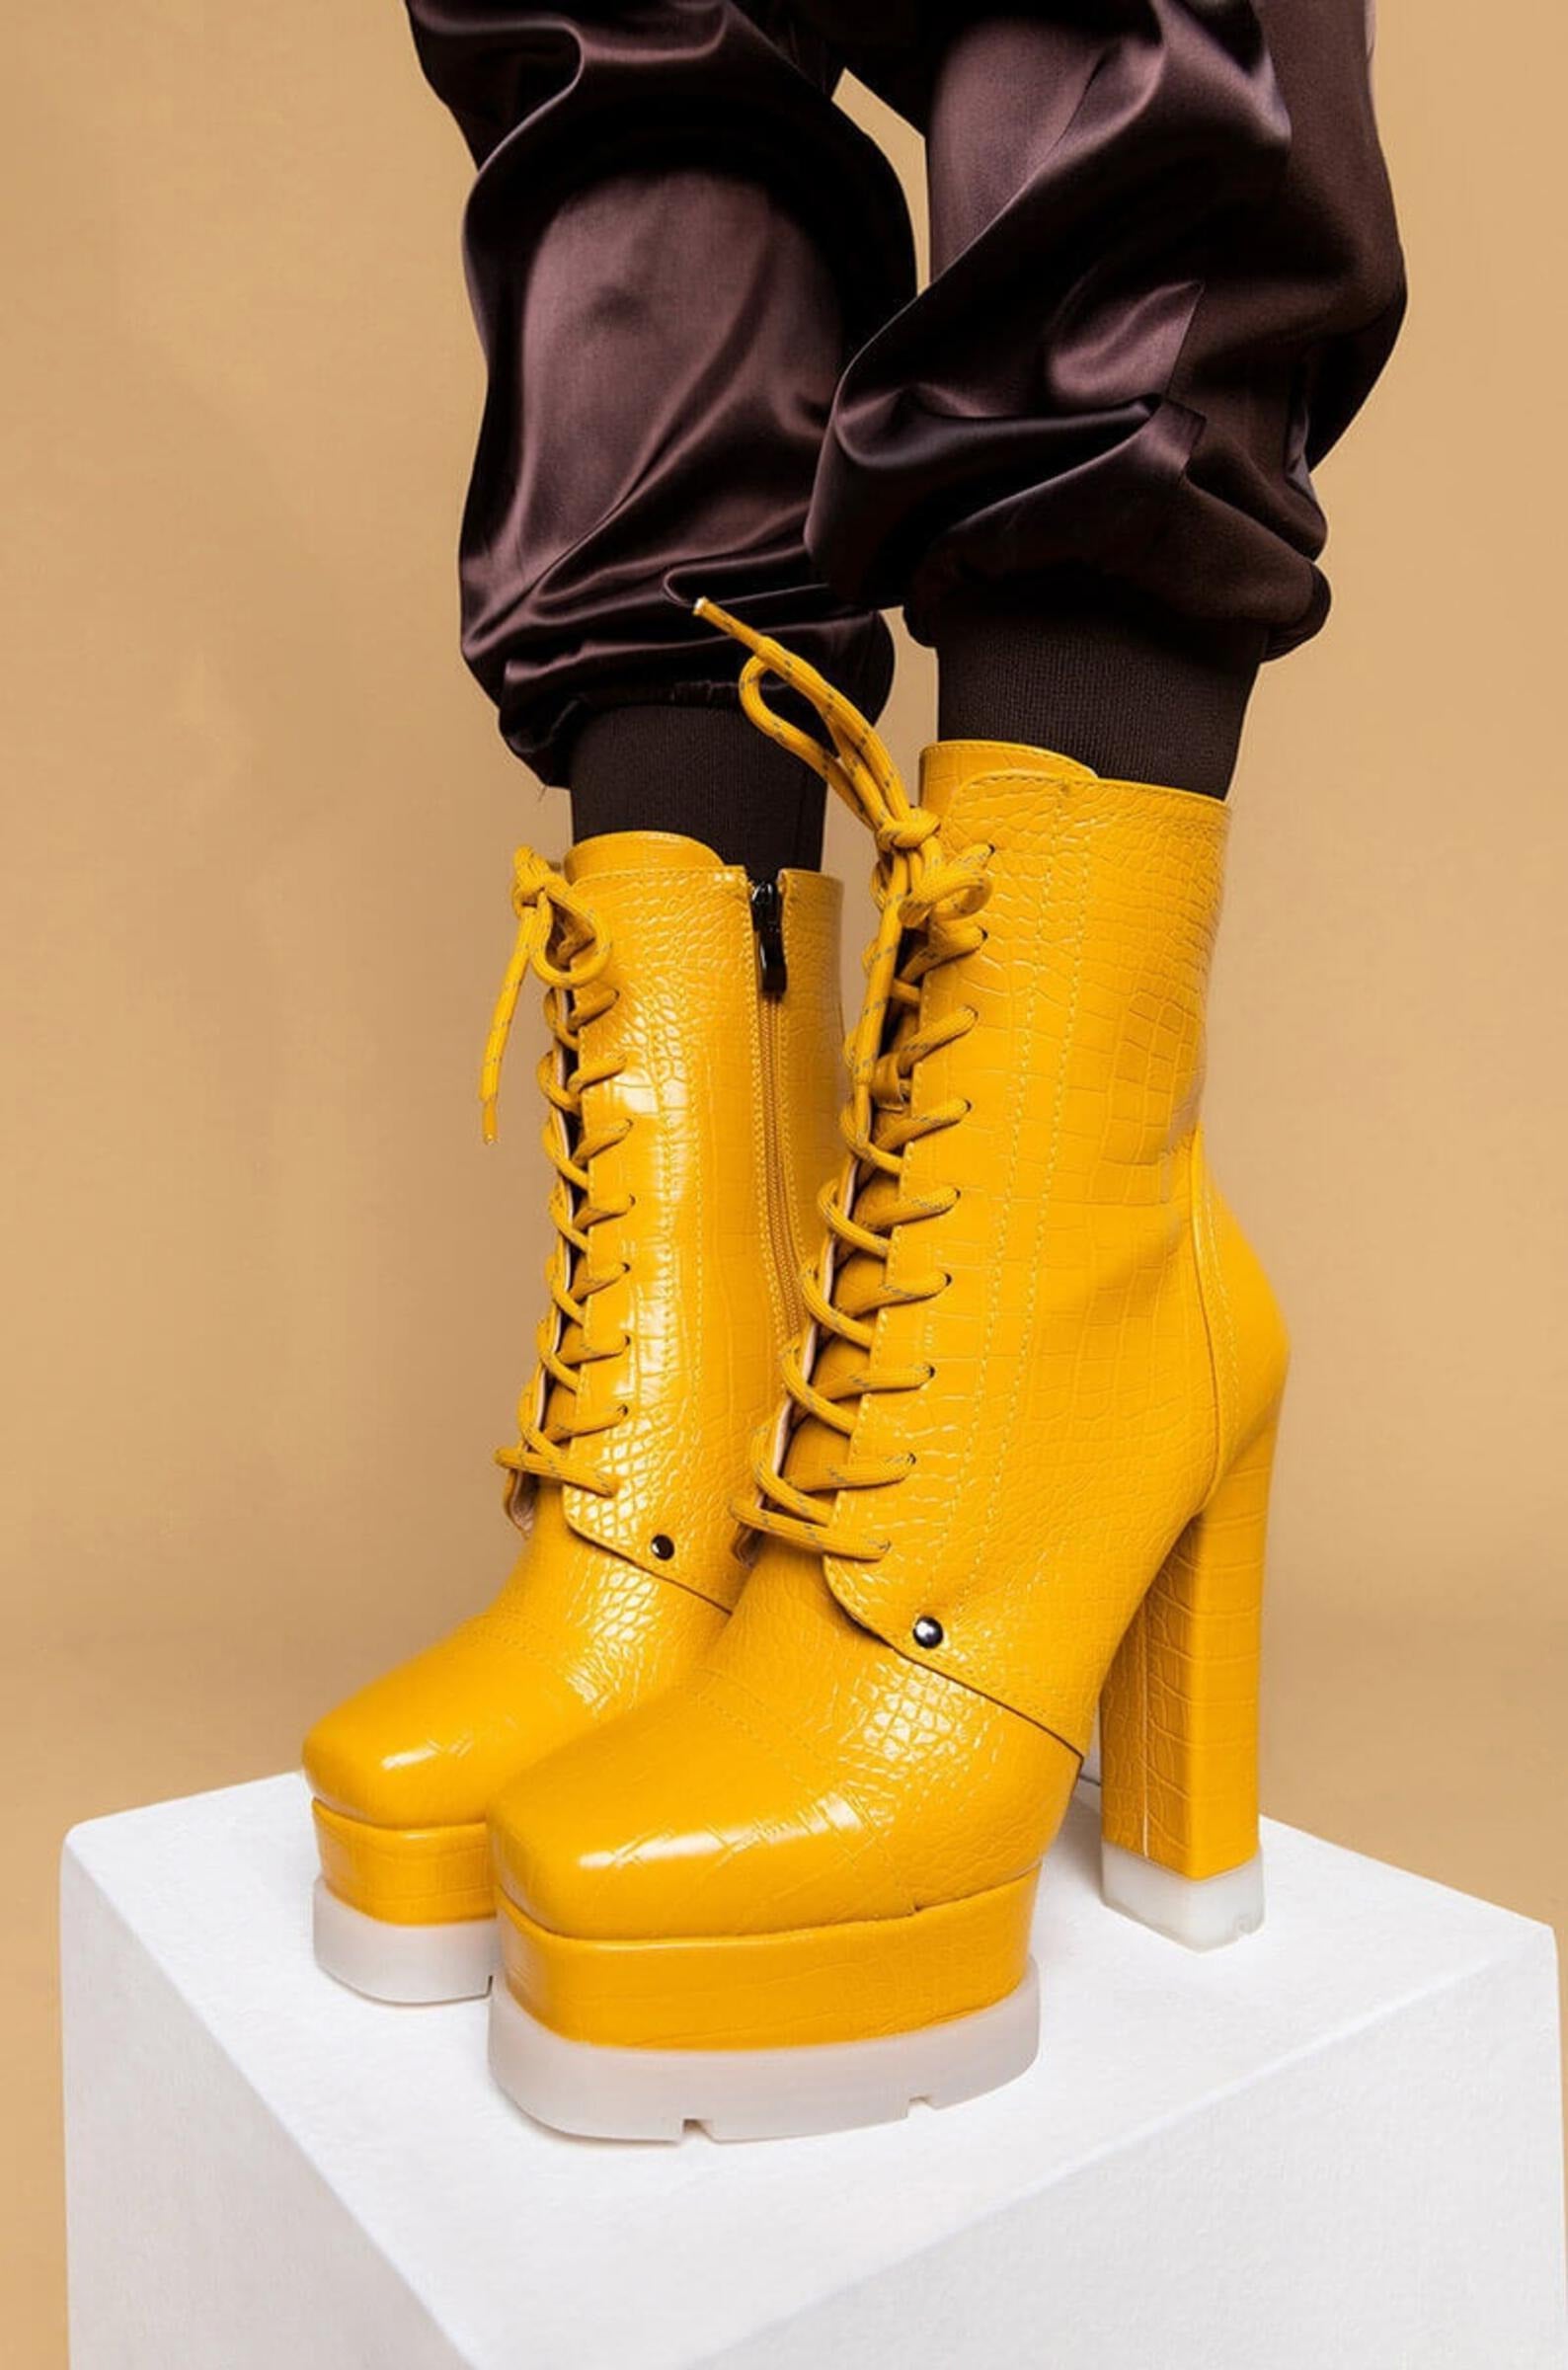 CR Yellow Black Pointy Toe Lace Up Sporty 4.5″ High Heel Ankle Boots | High heel  boots ankle, Lace high heels, Summer fashion shoes